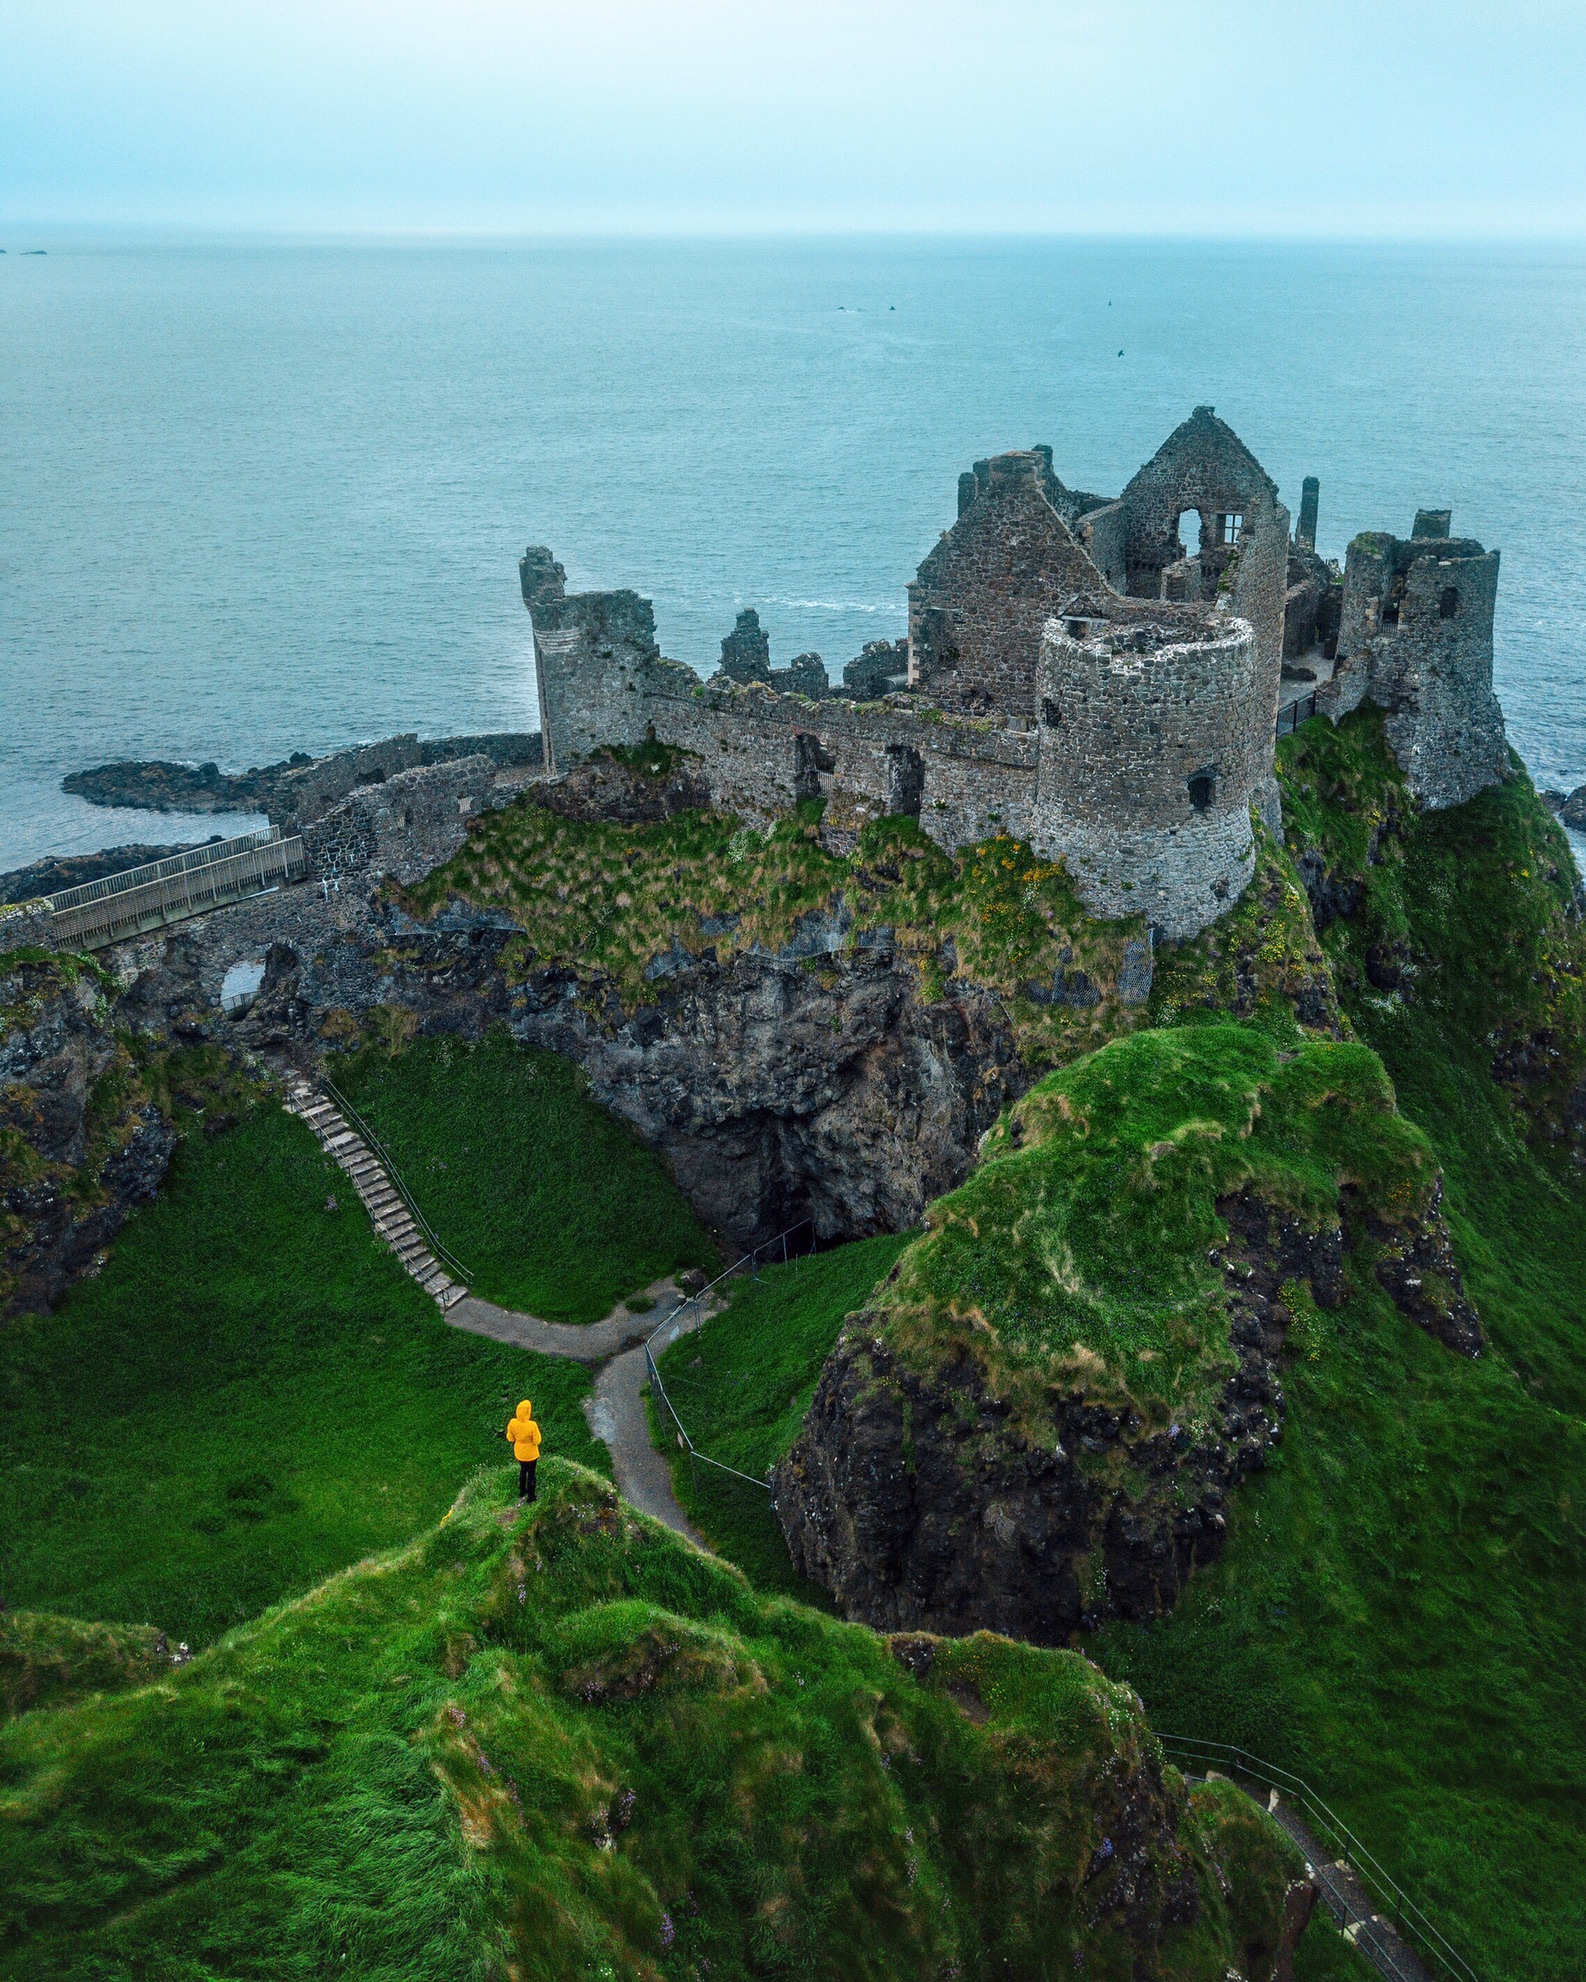 Figure in yellow standing on a cliff overlooking the Dunluce Castle in Northern Ireland.